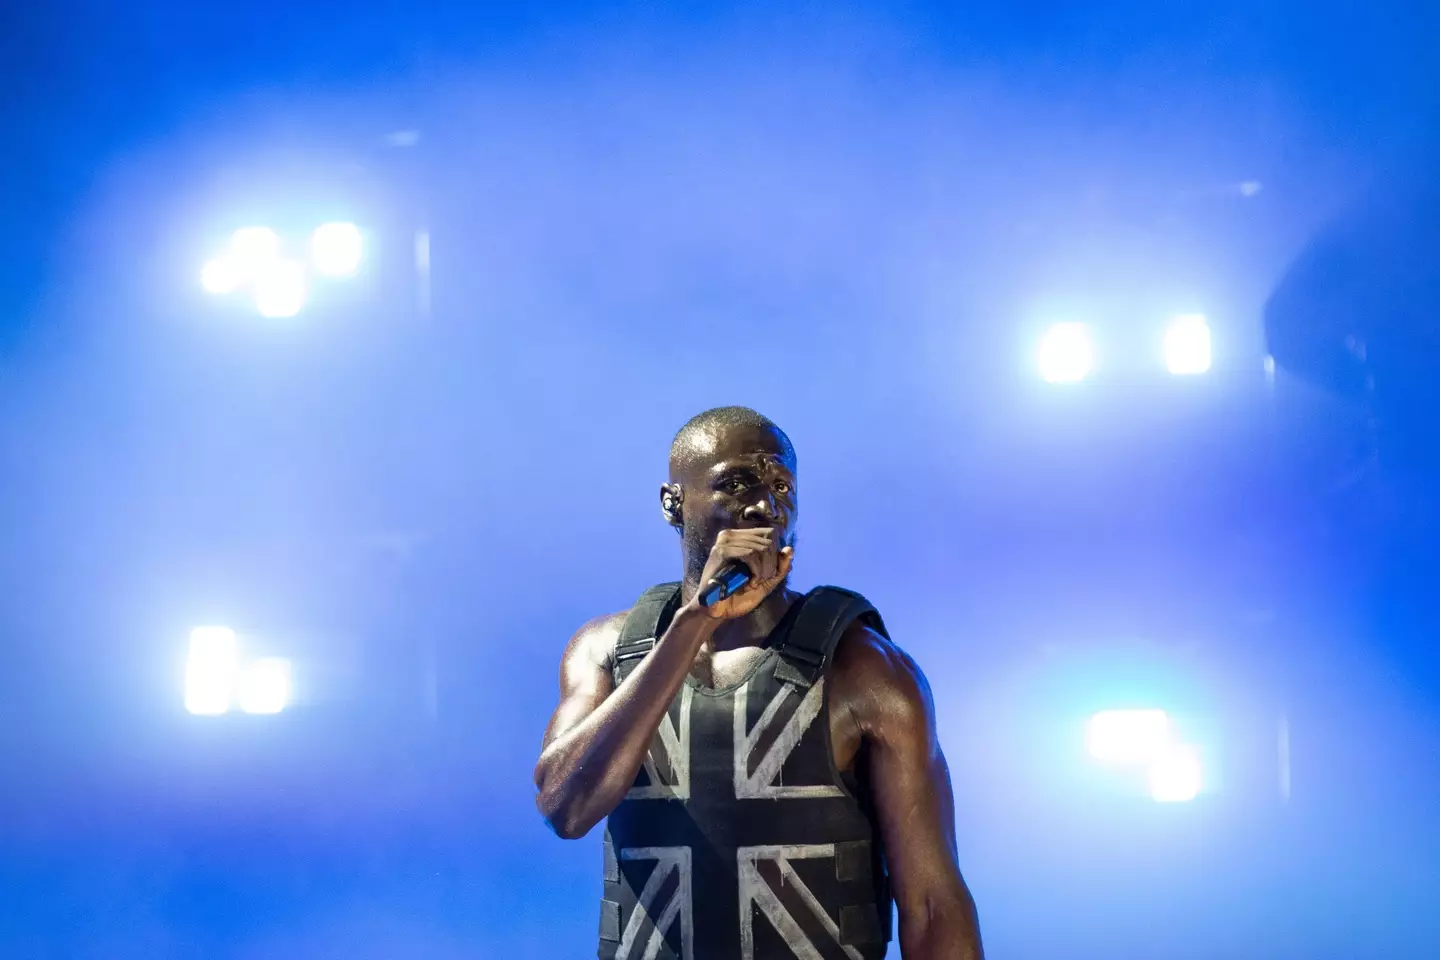 Grime artists like Stormzy have helped make Multicultural London English more popular.